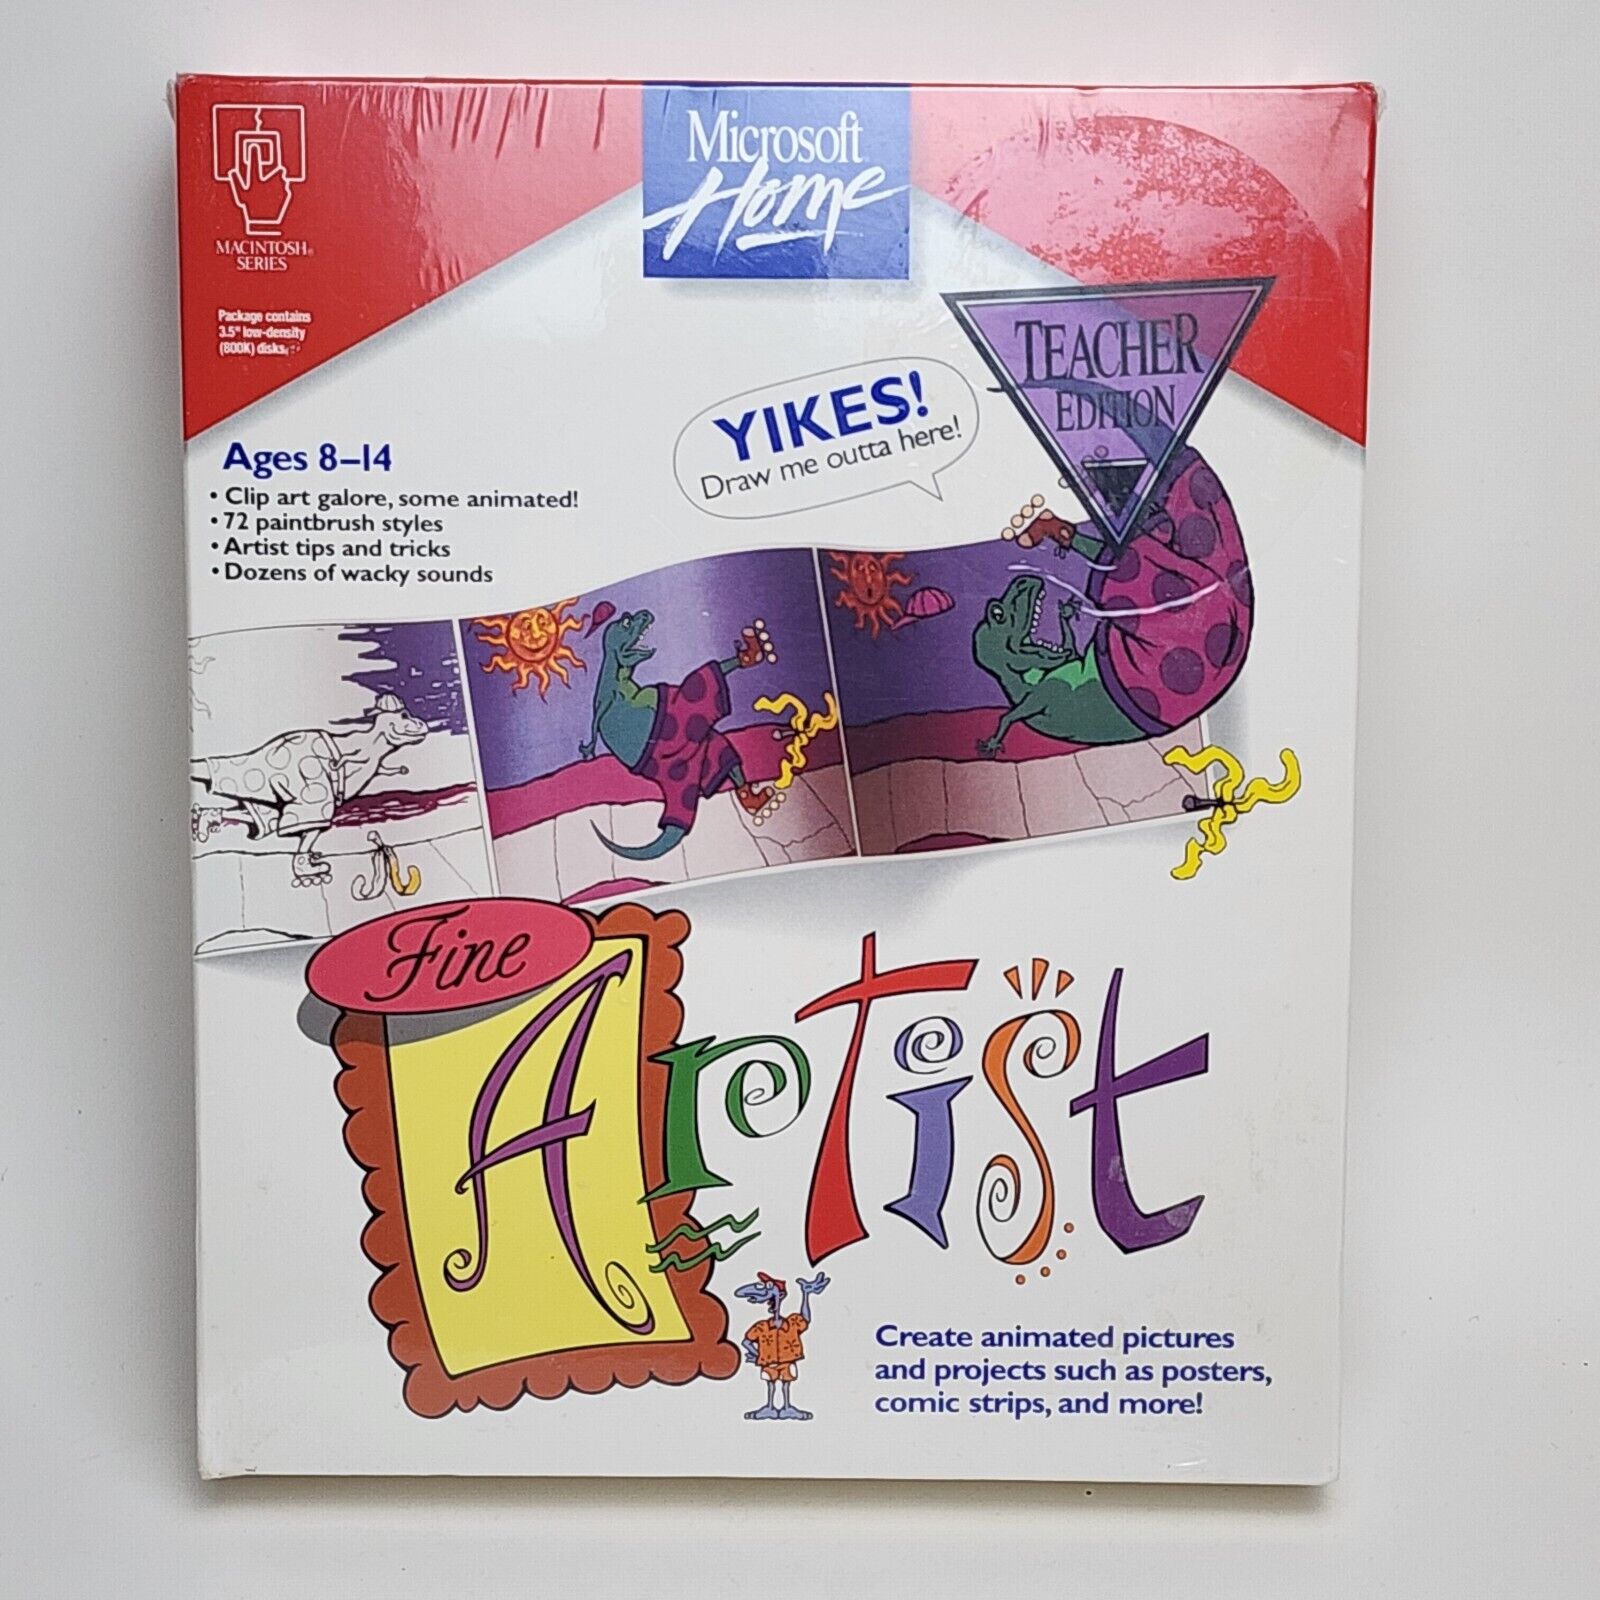 Microsoft Home Mac Fine Artist Create Pictures Projects Posters Comics SEALED